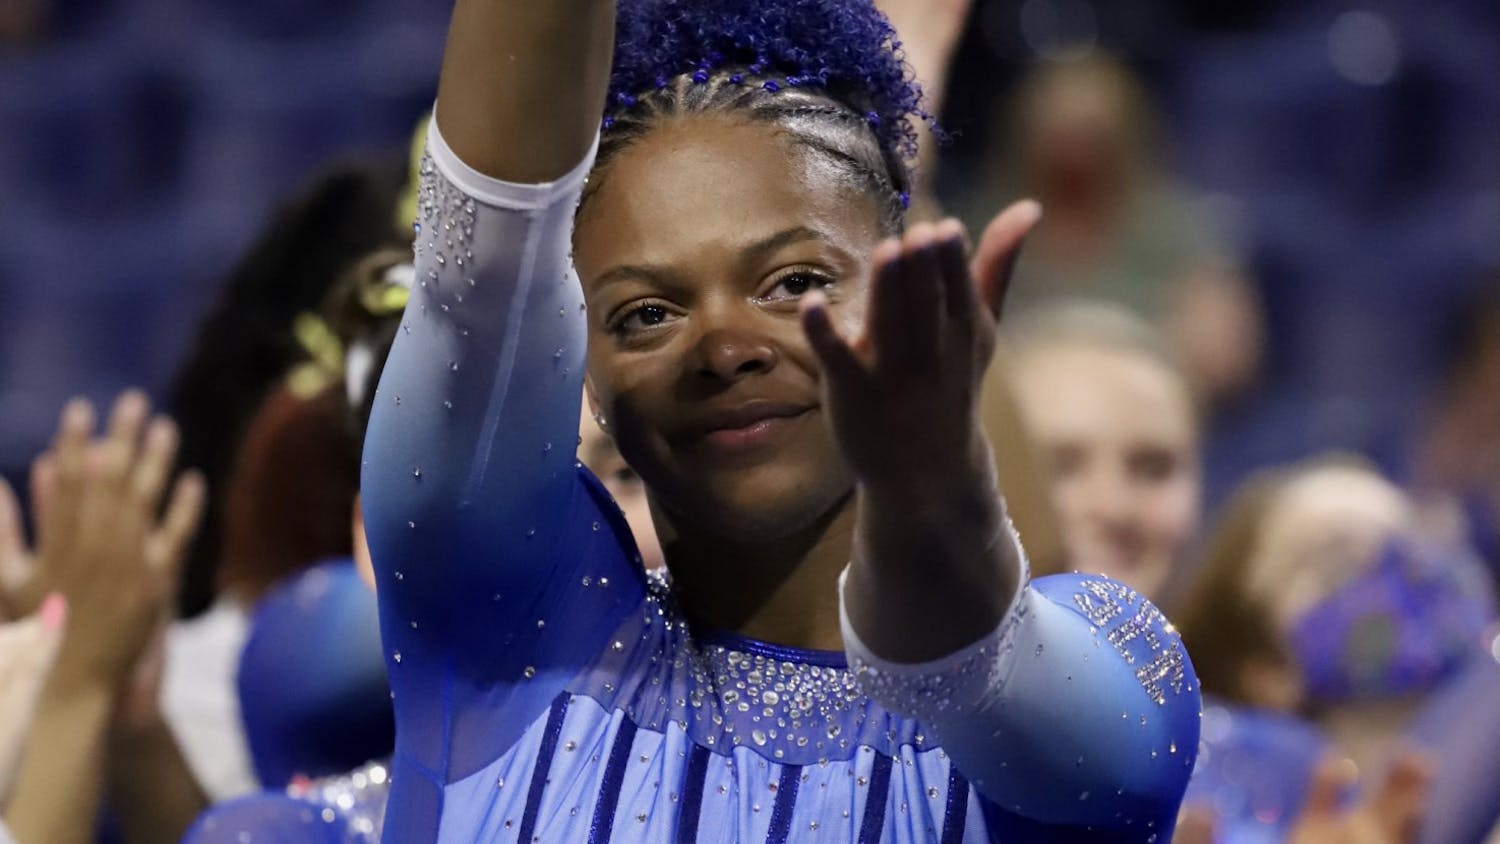 Senior Trinity Thomas gives a Gator Chomp during a routine on Feb. 26 against the Oklahoma Sooners. Thomas and the No. 2 Gators dominated Saturday night to earn an NCAA Championship berth.